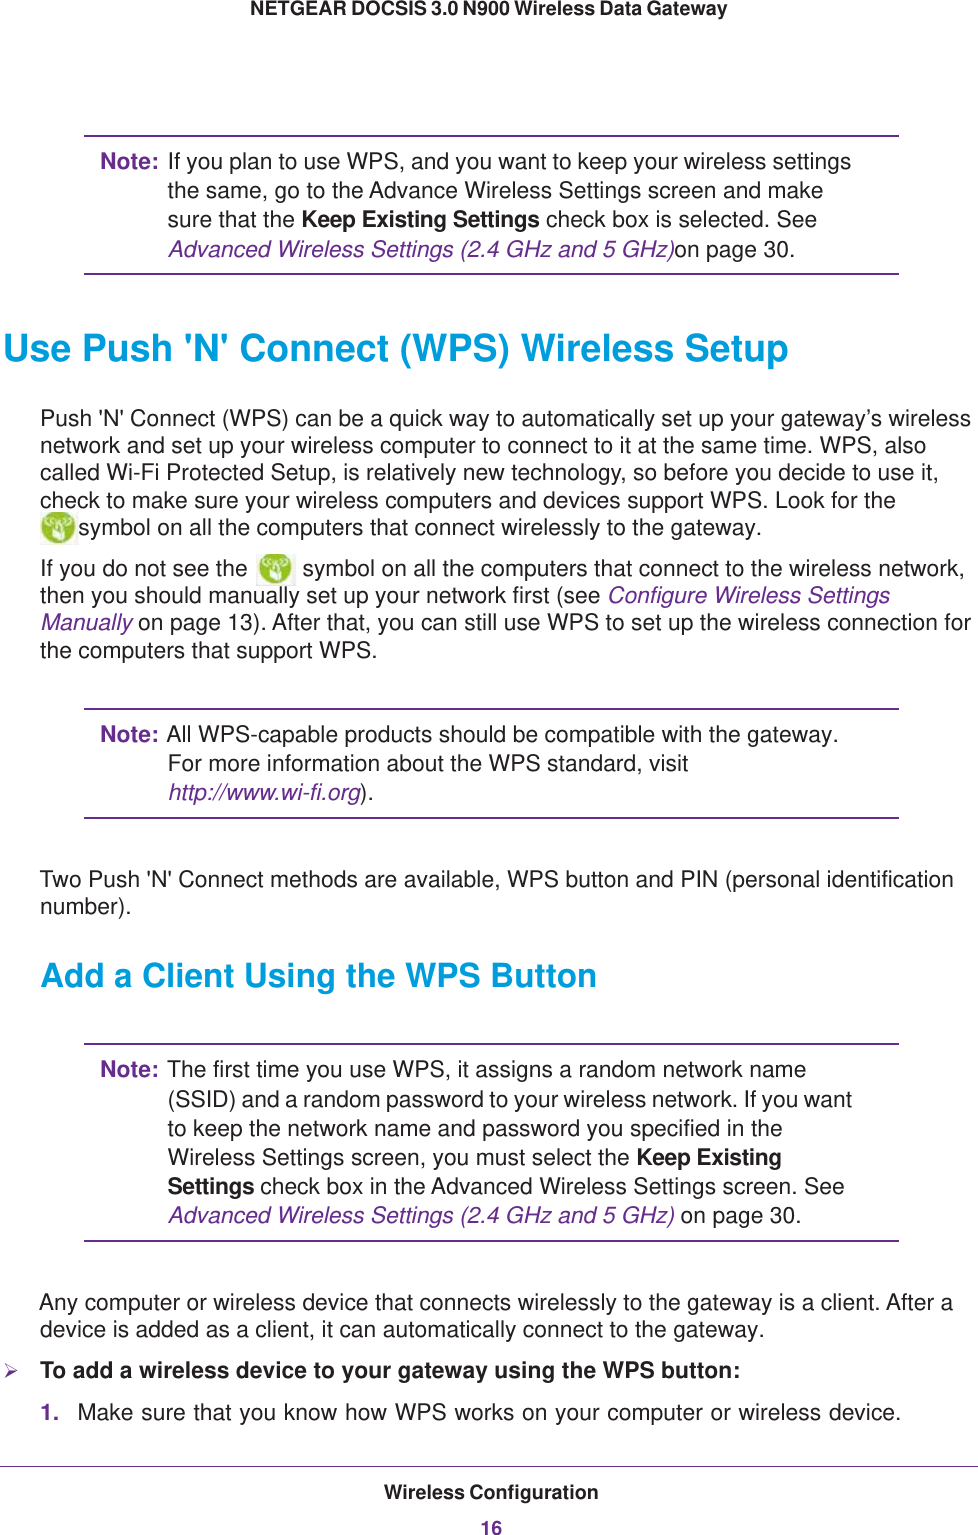 Wireless Configuration16NETGEAR DOCSIS 3.0 N900 Wireless Data Gateway Note: If you plan to use WPS, and you want to keep your wireless settings the same, go to the Advance Wireless Settings screen and make sure that the Keep Existing Settings check box is selected. See Advanced Wireless Settings (2.4 GHz and 5 GHz)on page 30.Use Push &apos;N&apos; Connect (WPS) Wireless SetupPush &apos;N&apos; Connect (WPS) can be a quick way to automatically set up your gateway’s wireless network and set up your wireless computer to connect to it at the same time. WPS, also called Wi-Fi Protected Setup, is relatively new technology, so before you decide to use it, check to make sure your wireless computers and devices support WPS. Look for the symbol on all the computers that connect wirelessly to the gateway. If you do not see the   symbol on all the computers that connect to the wireless network, then you should manually set up your network first (see Configure Wireless Settings Manually on page  13). After that, you can still use WPS to set up the wireless connection for the computers that support WPS.Note: All WPS-capable products should be compatible with the gateway. For more information about the WPS standard, visit http://www.wi-fi.org). Two Push &apos;N&apos; Connect methods are available, WPS button and PIN (personal identification number).Add a Client Using the WPS ButtonNote: The first time you use WPS, it assigns a random network name (SSID) and a random password to your wireless network. If you want to keep the network name and password you specified in the Wireless Settings screen, you must select the Keep Existing Settings check box in the Advanced Wireless Settings screen. See Advanced Wireless Settings (2.4 GHz and 5 GHz) on page 30.Any computer or wireless device that connects wirelessly to the gateway is a client. After a device is added as a client, it can automatically connect to the gateway.To add a wireless device to your gateway using the WPS button:1. Make sure that you know how WPS works on your computer or wireless device. 